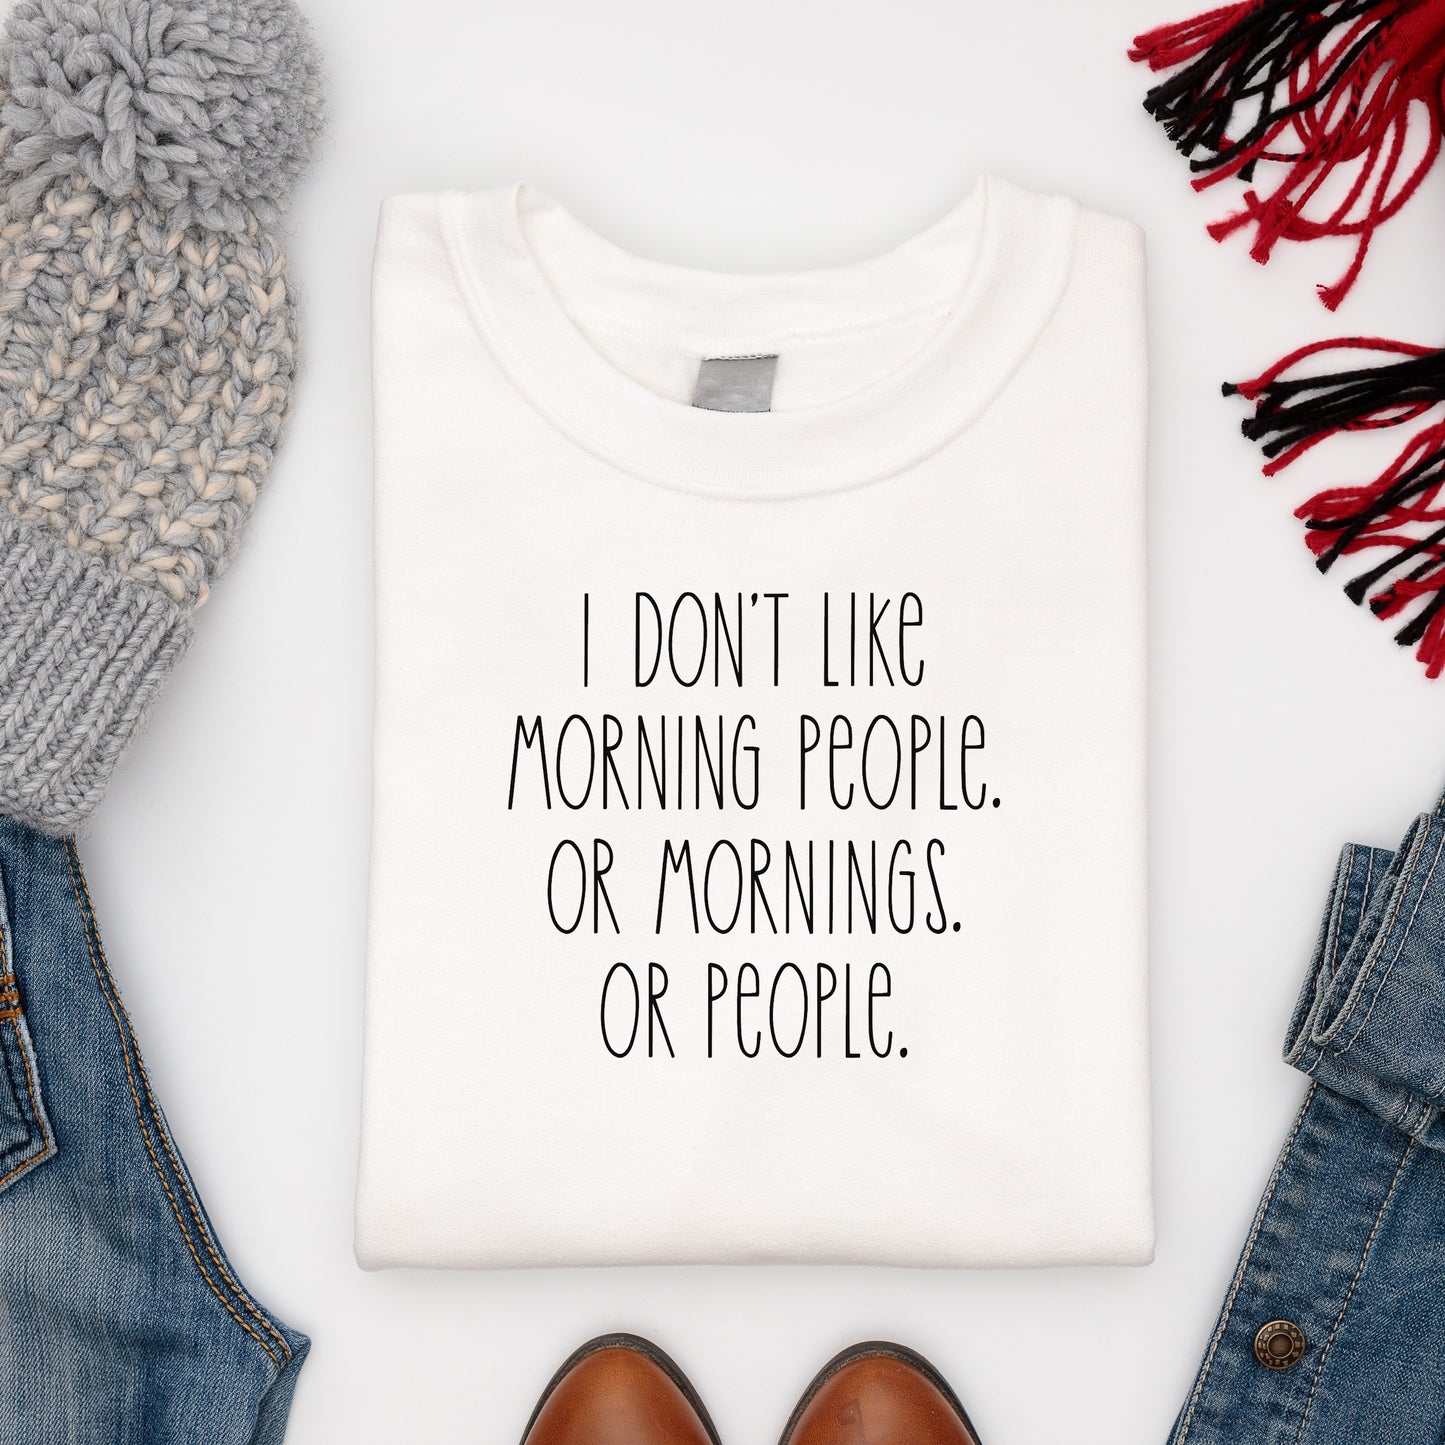 Comfy soft white jumper with funny slogan paired with winter woollies